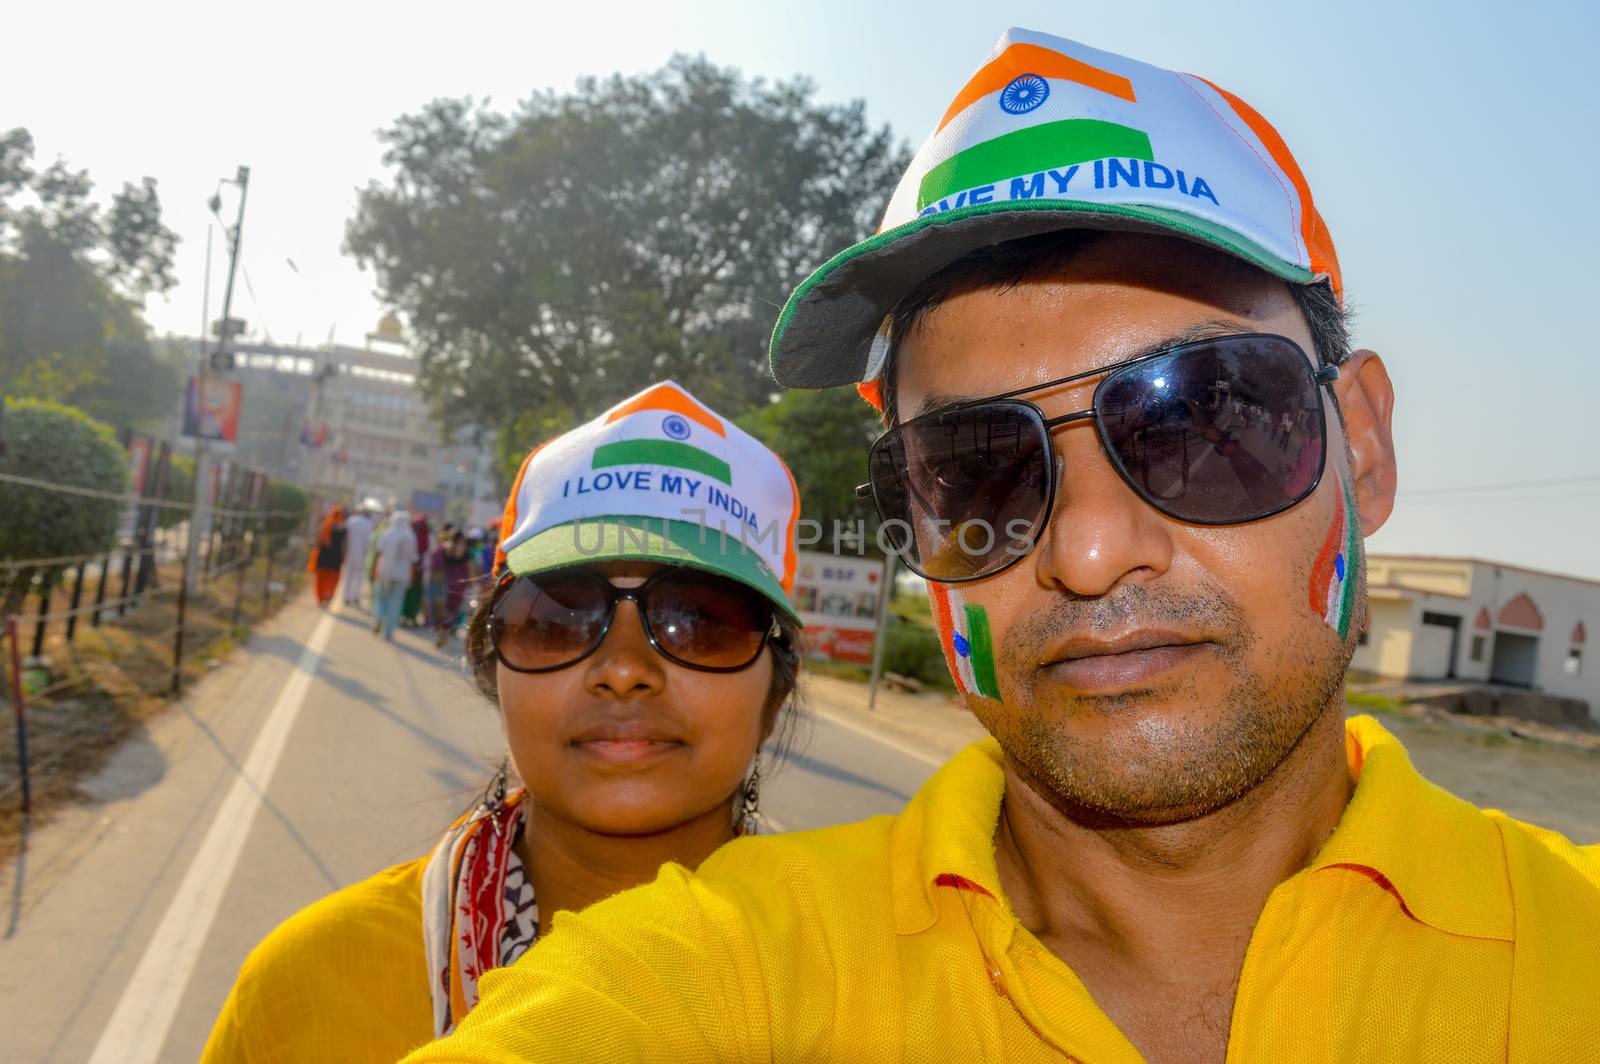 Cricket fans with painted face in Indian tricolor. by sudiptabhowmick